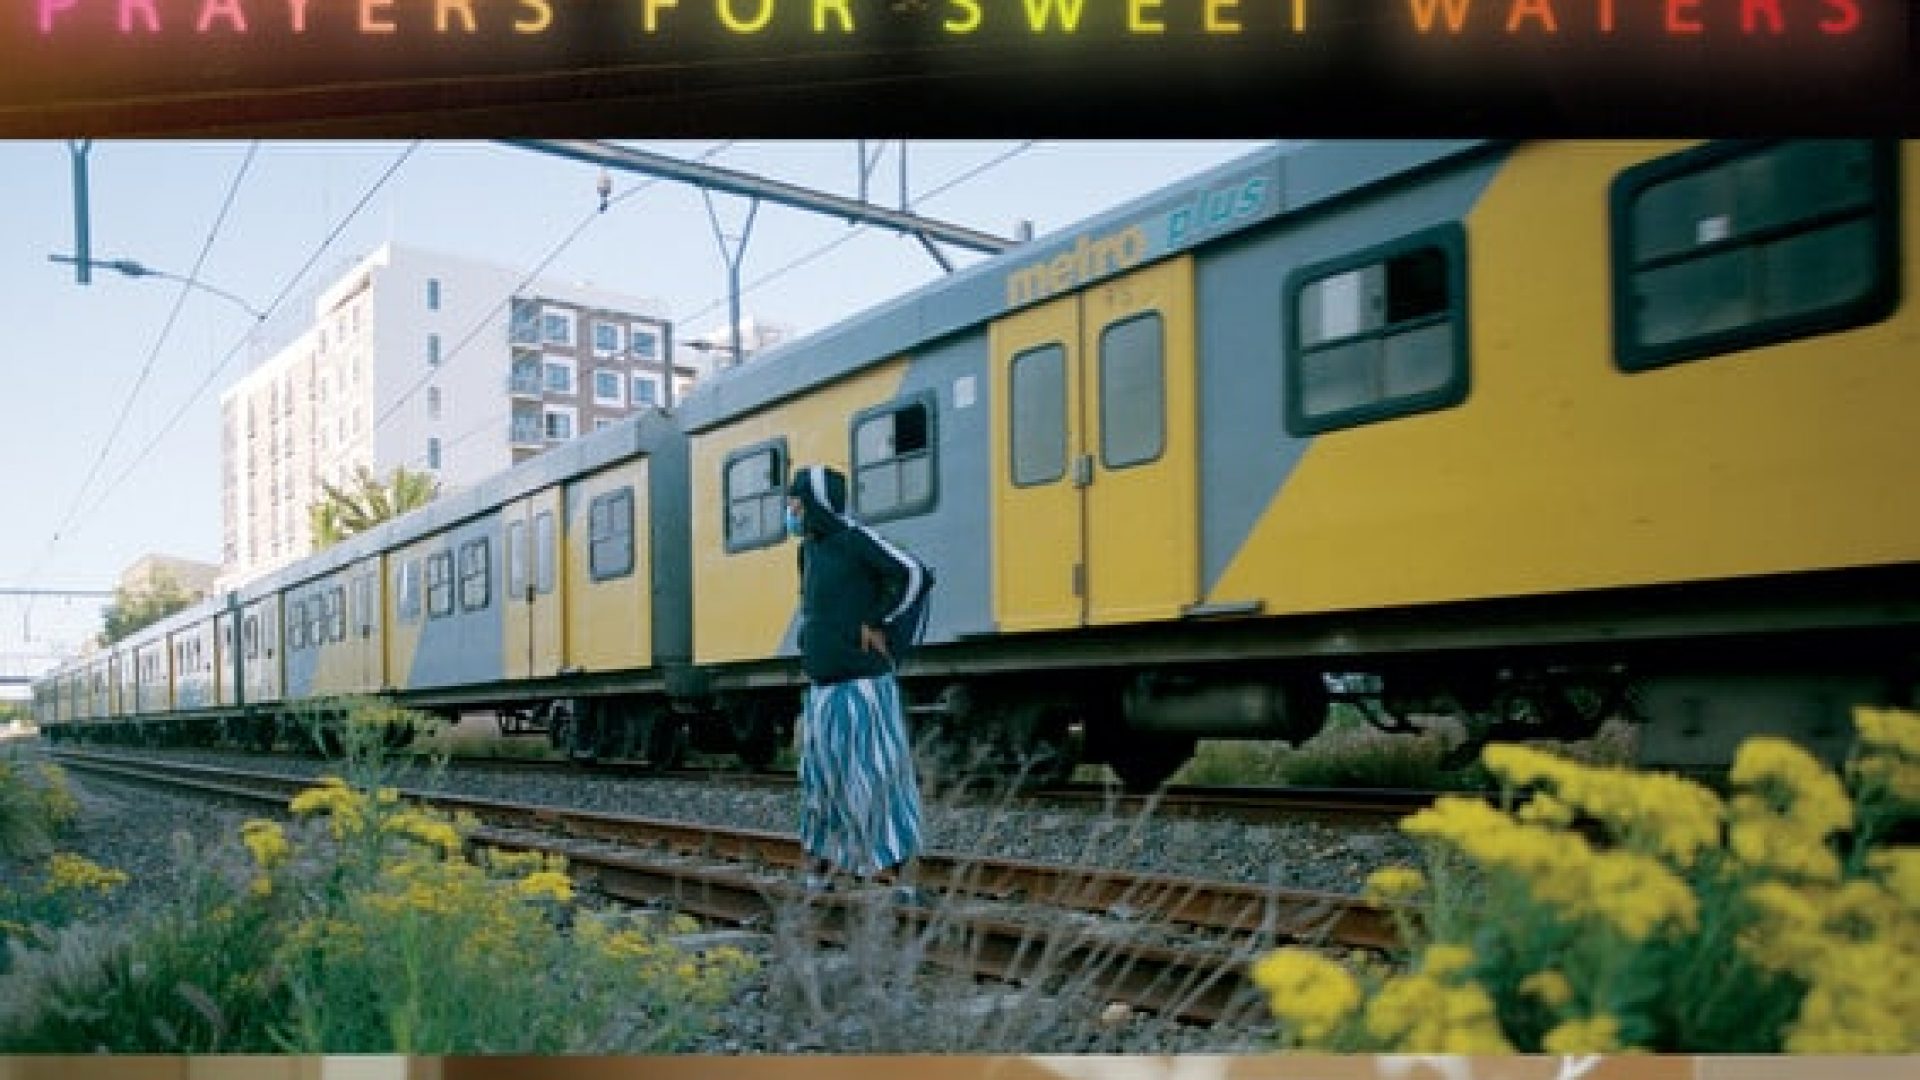 Prayers for Sweet Waters_poster